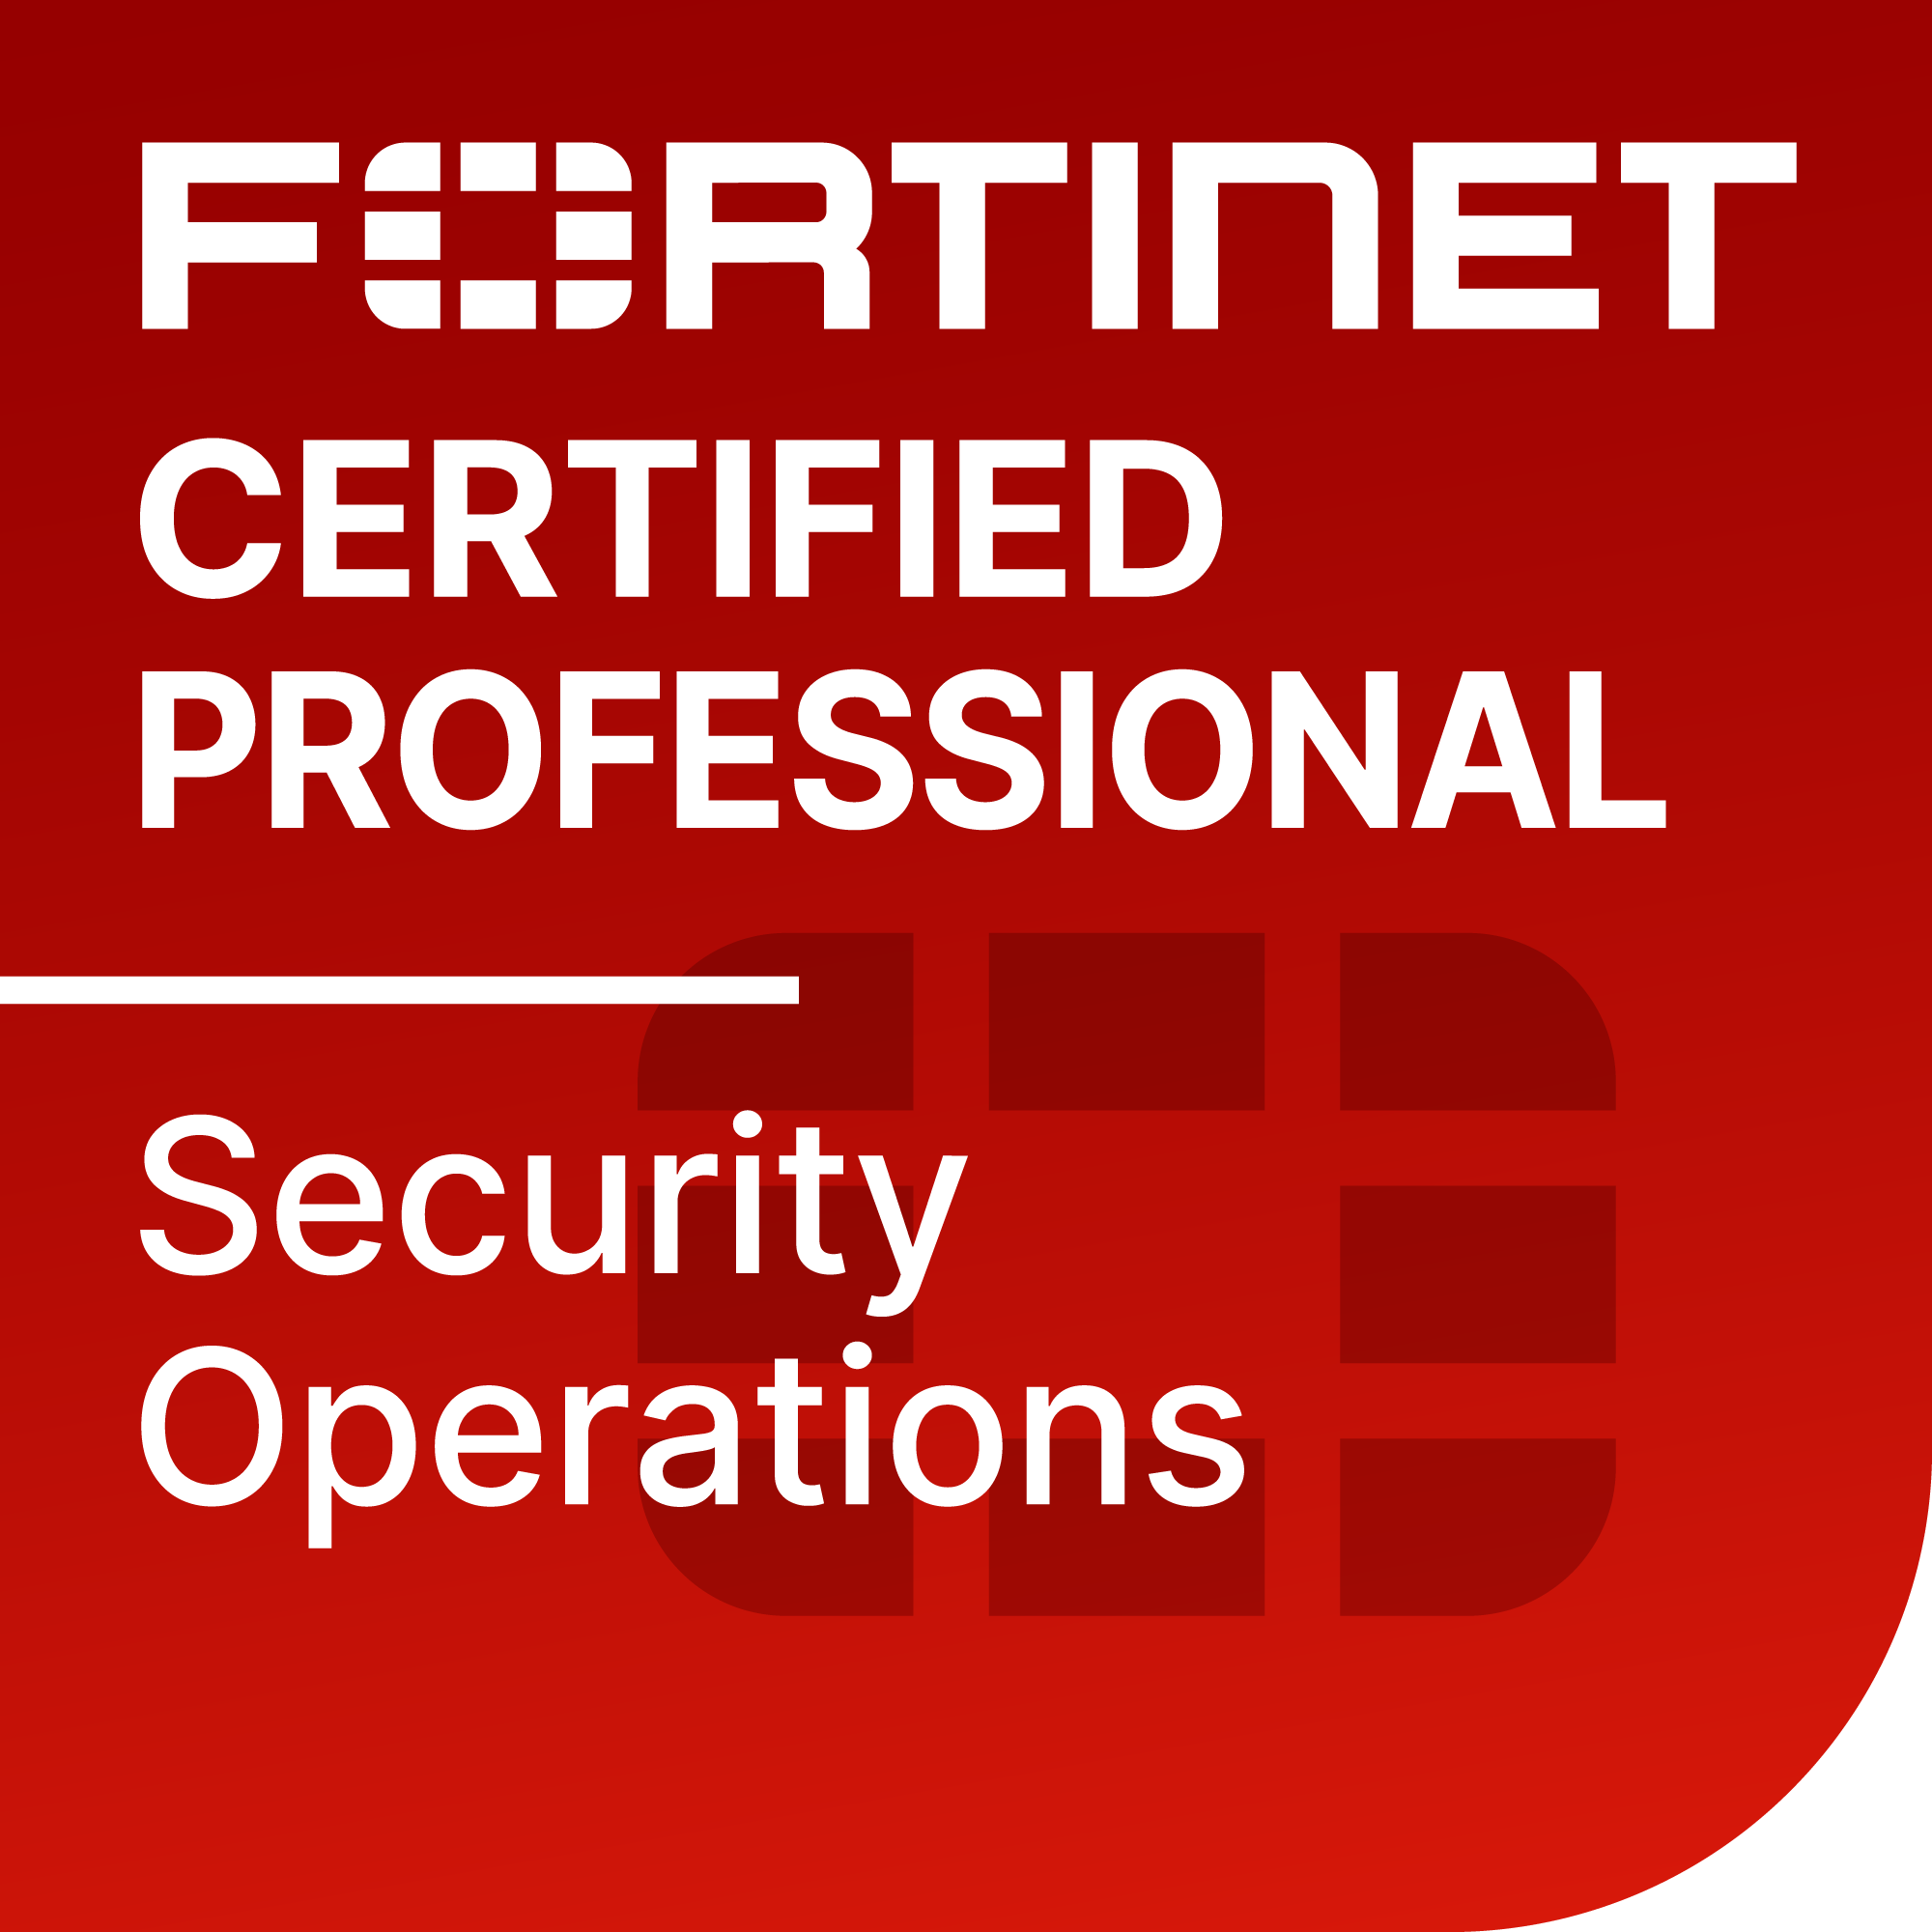 Fortinet Certified Professional in Security Operations Certification